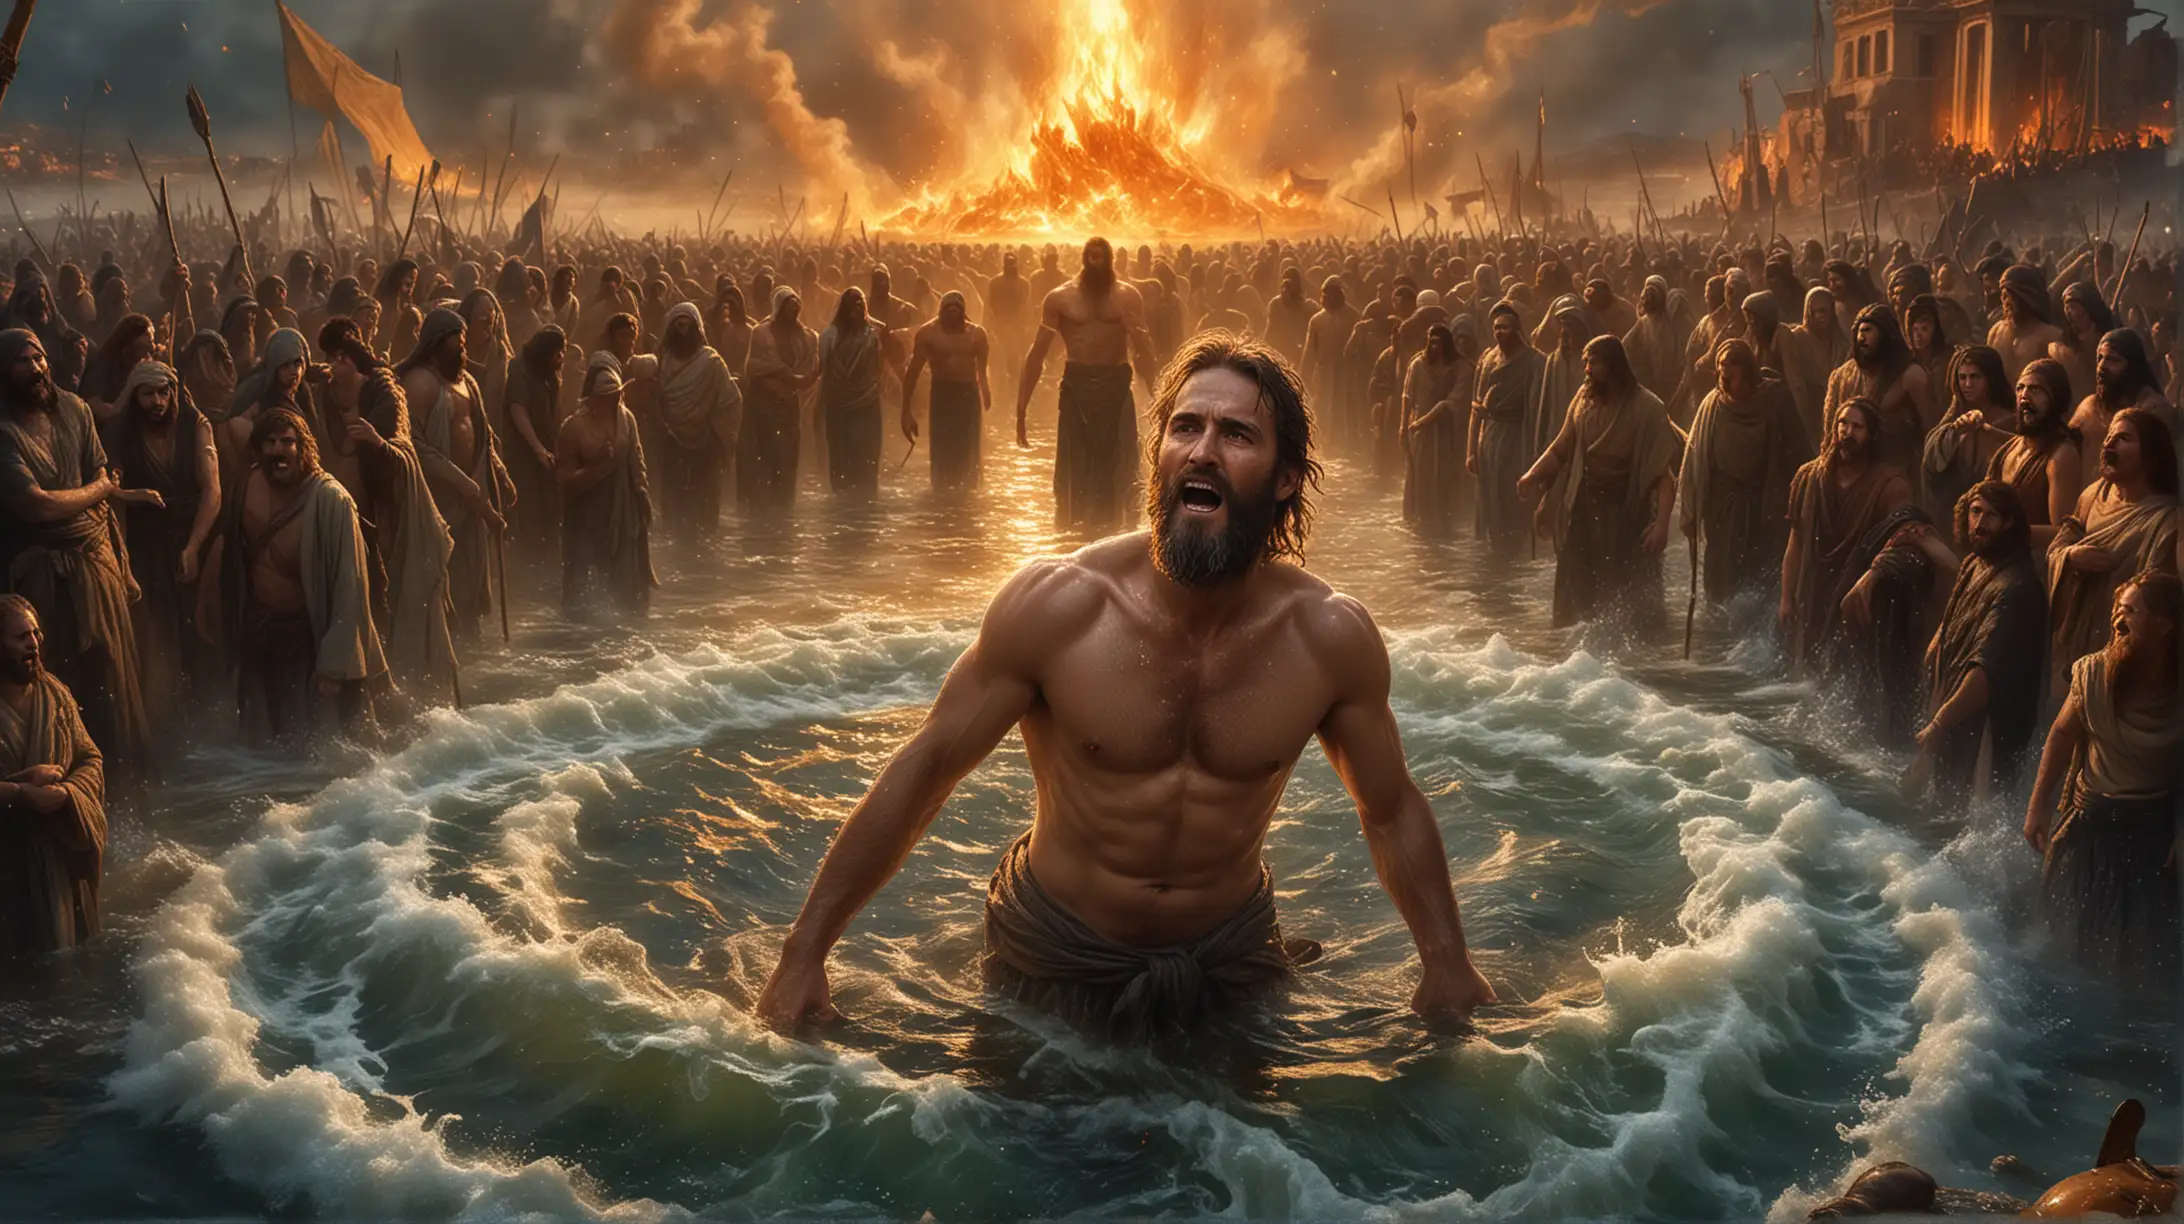 a man in a tub surrounded by many people in a crowd, epic biblical depiction, boiling, stands in a boiling pod of oil, boiling oil flames, charon the ferryman of hades, jesus walking on water, epic scene of zeus, beautiful image ever created, moses, epiphany, amazing art, by Krzysztof Boguszewski, sea of souls